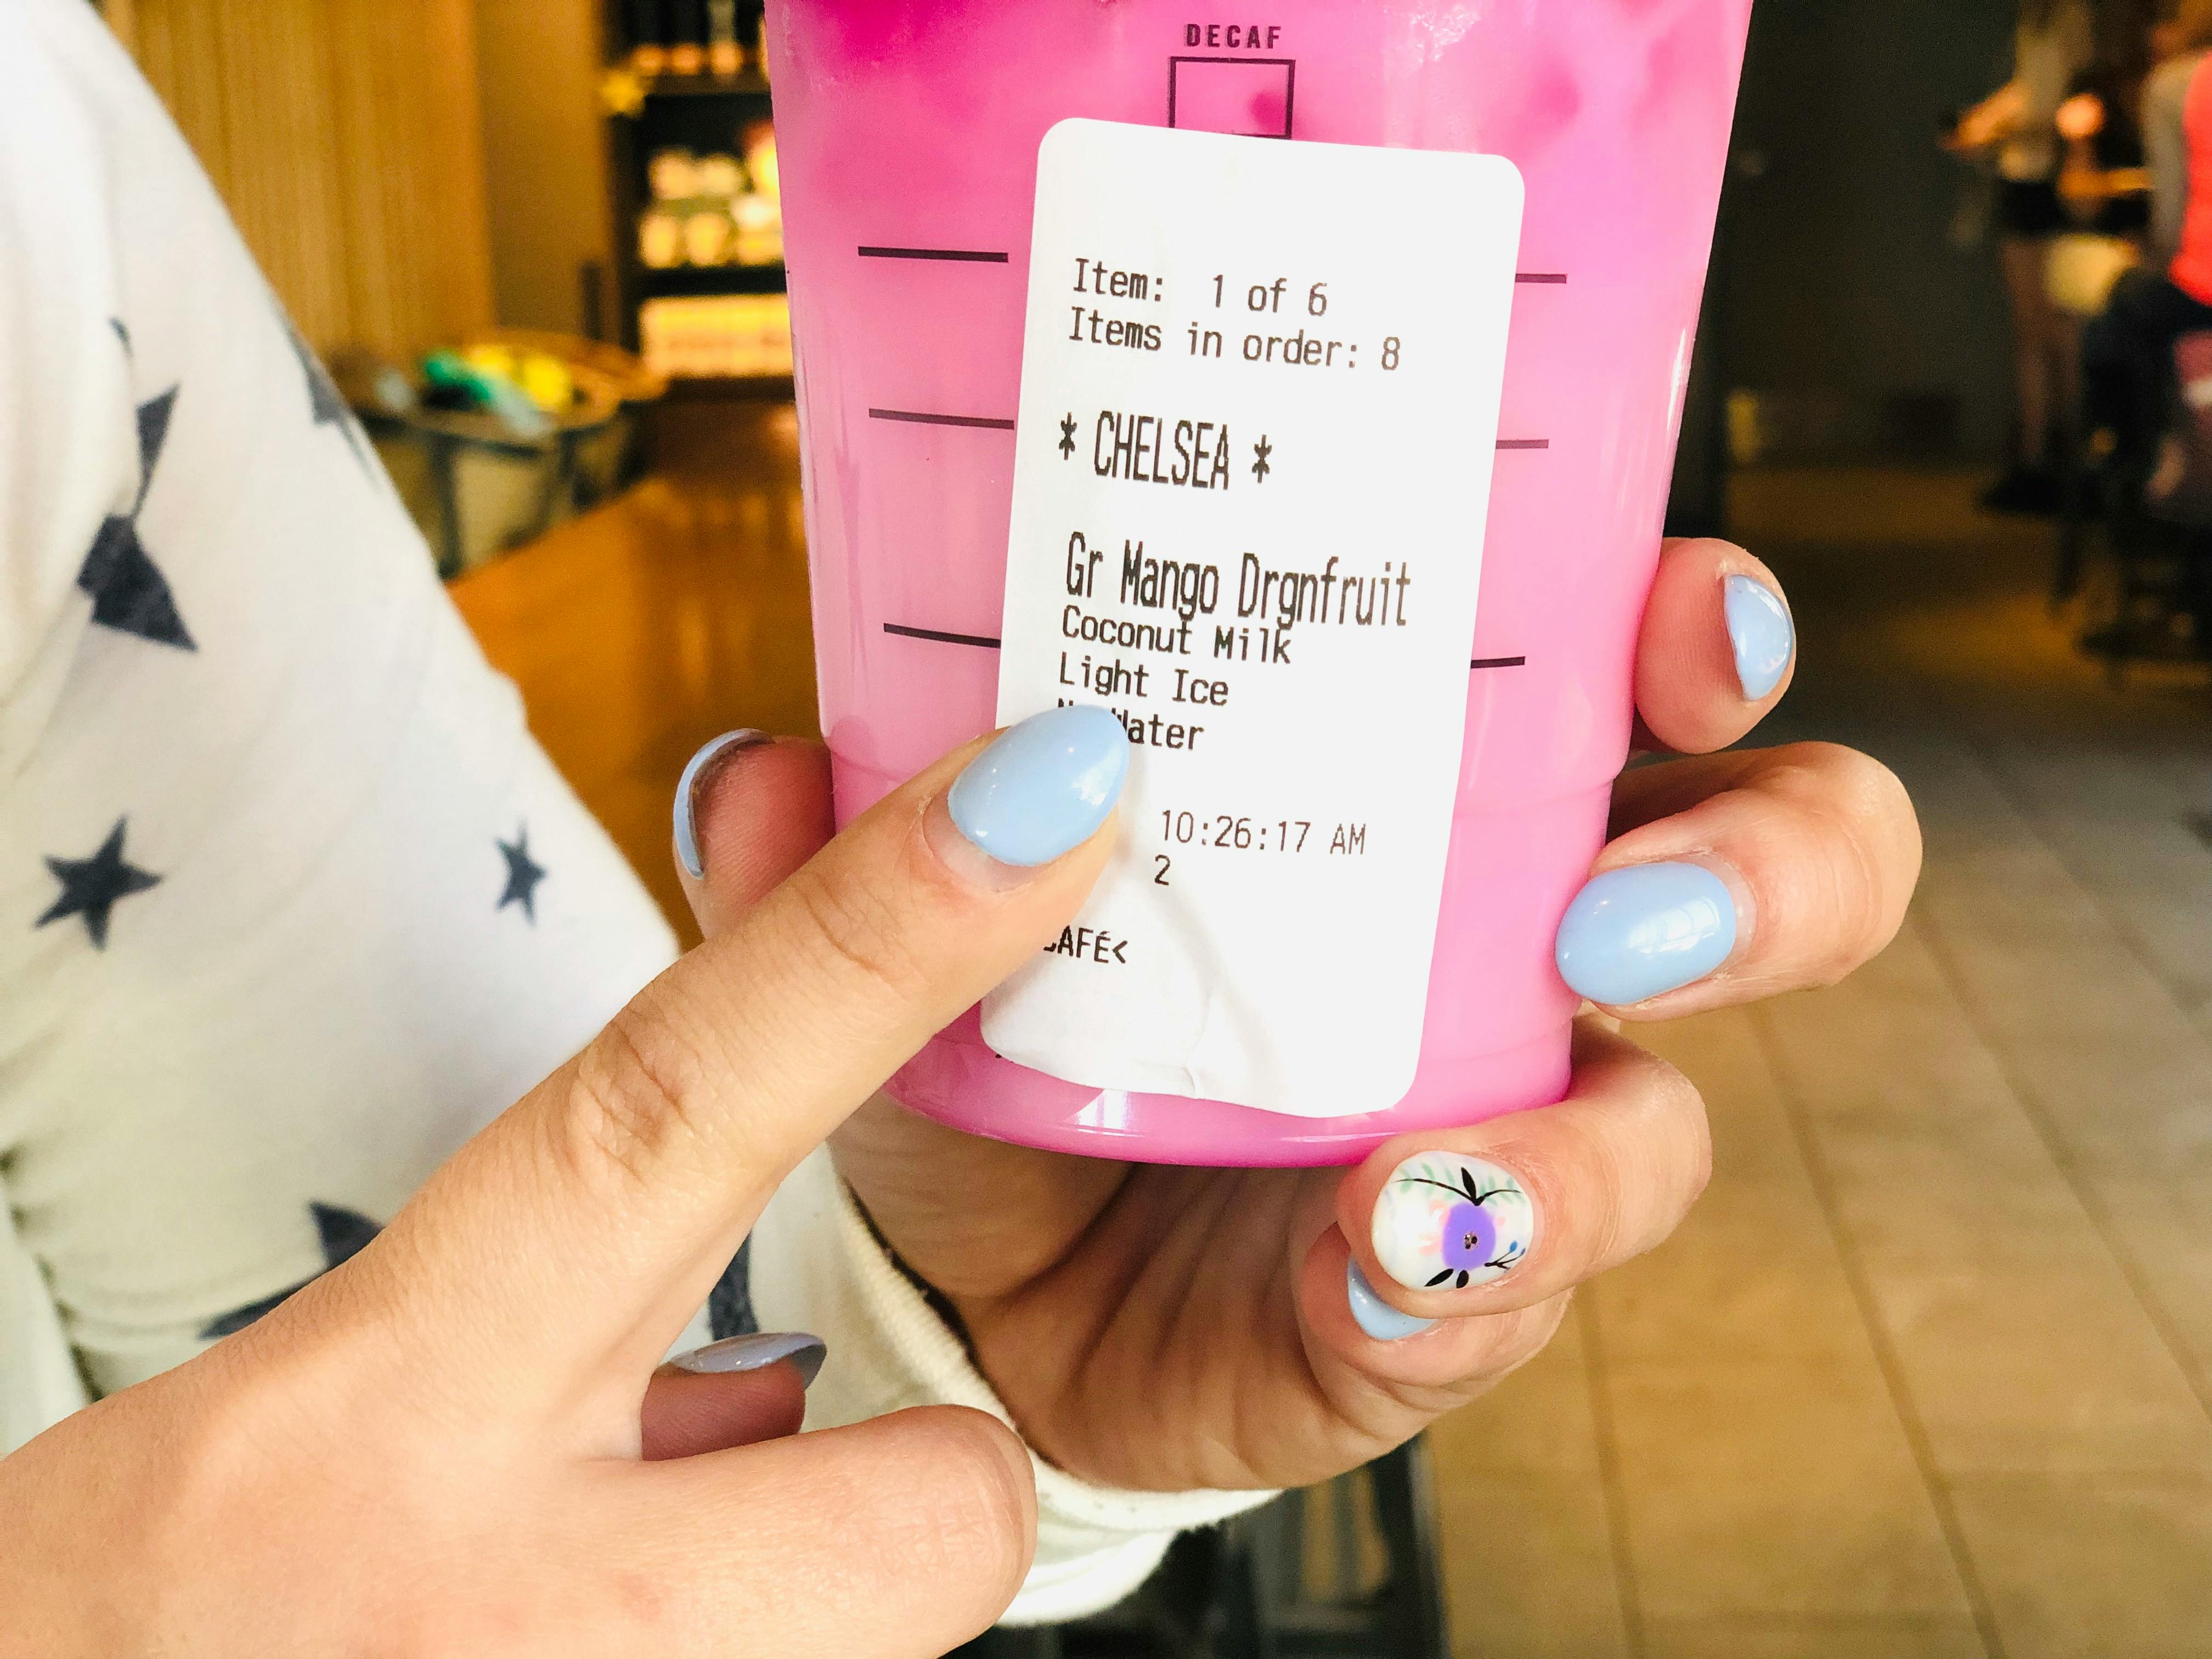 A person holding up a summer refresher drink from Starbucks and pointing to "Light Ice" printed on the label.